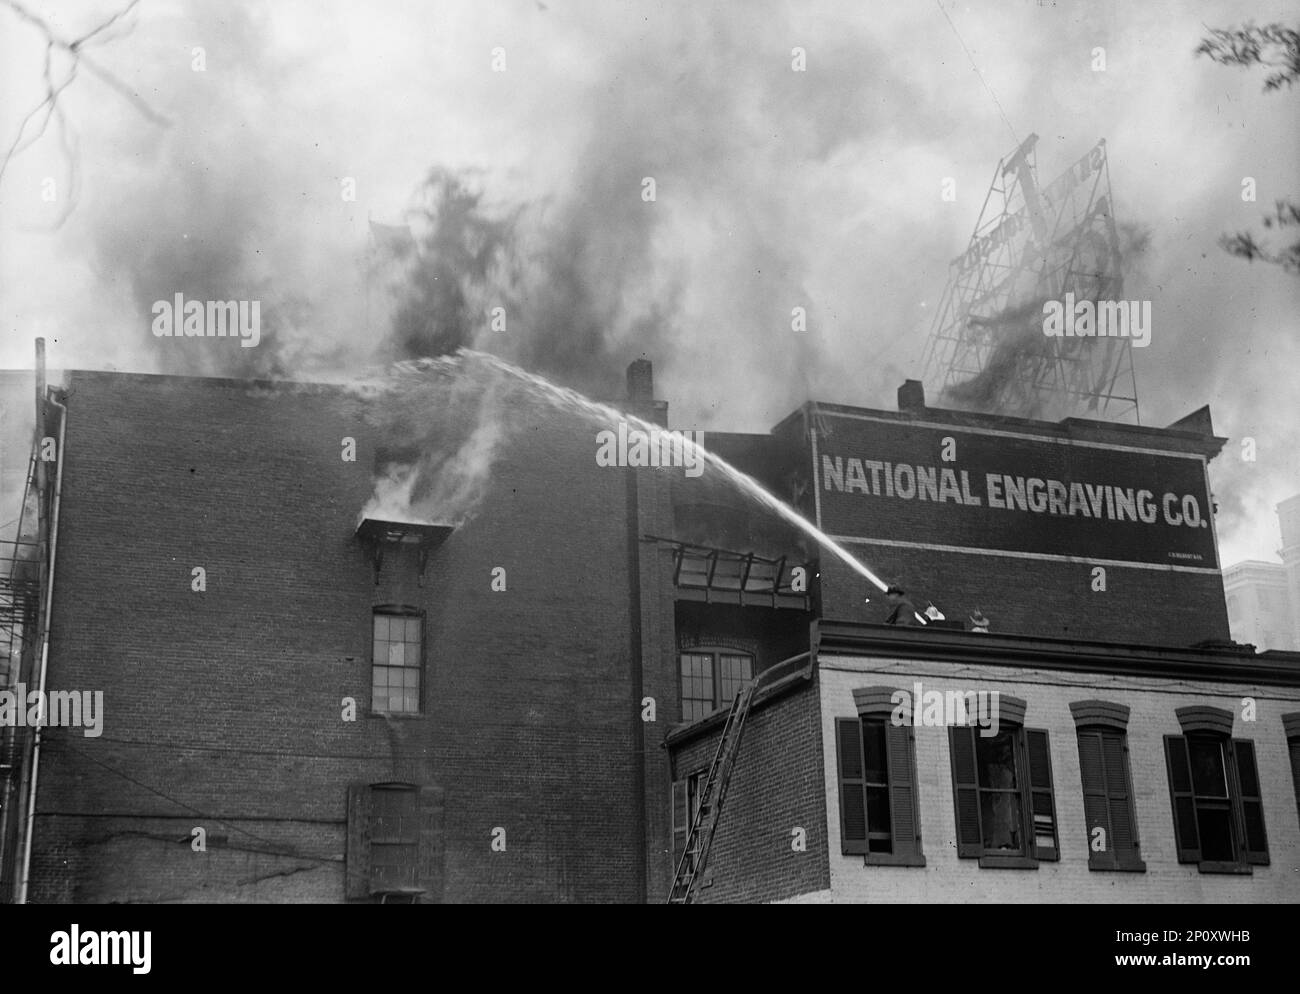 National Engraving Co. Washington, D.C. - Fire, 1917. Firefighters with hose. Stock Photo